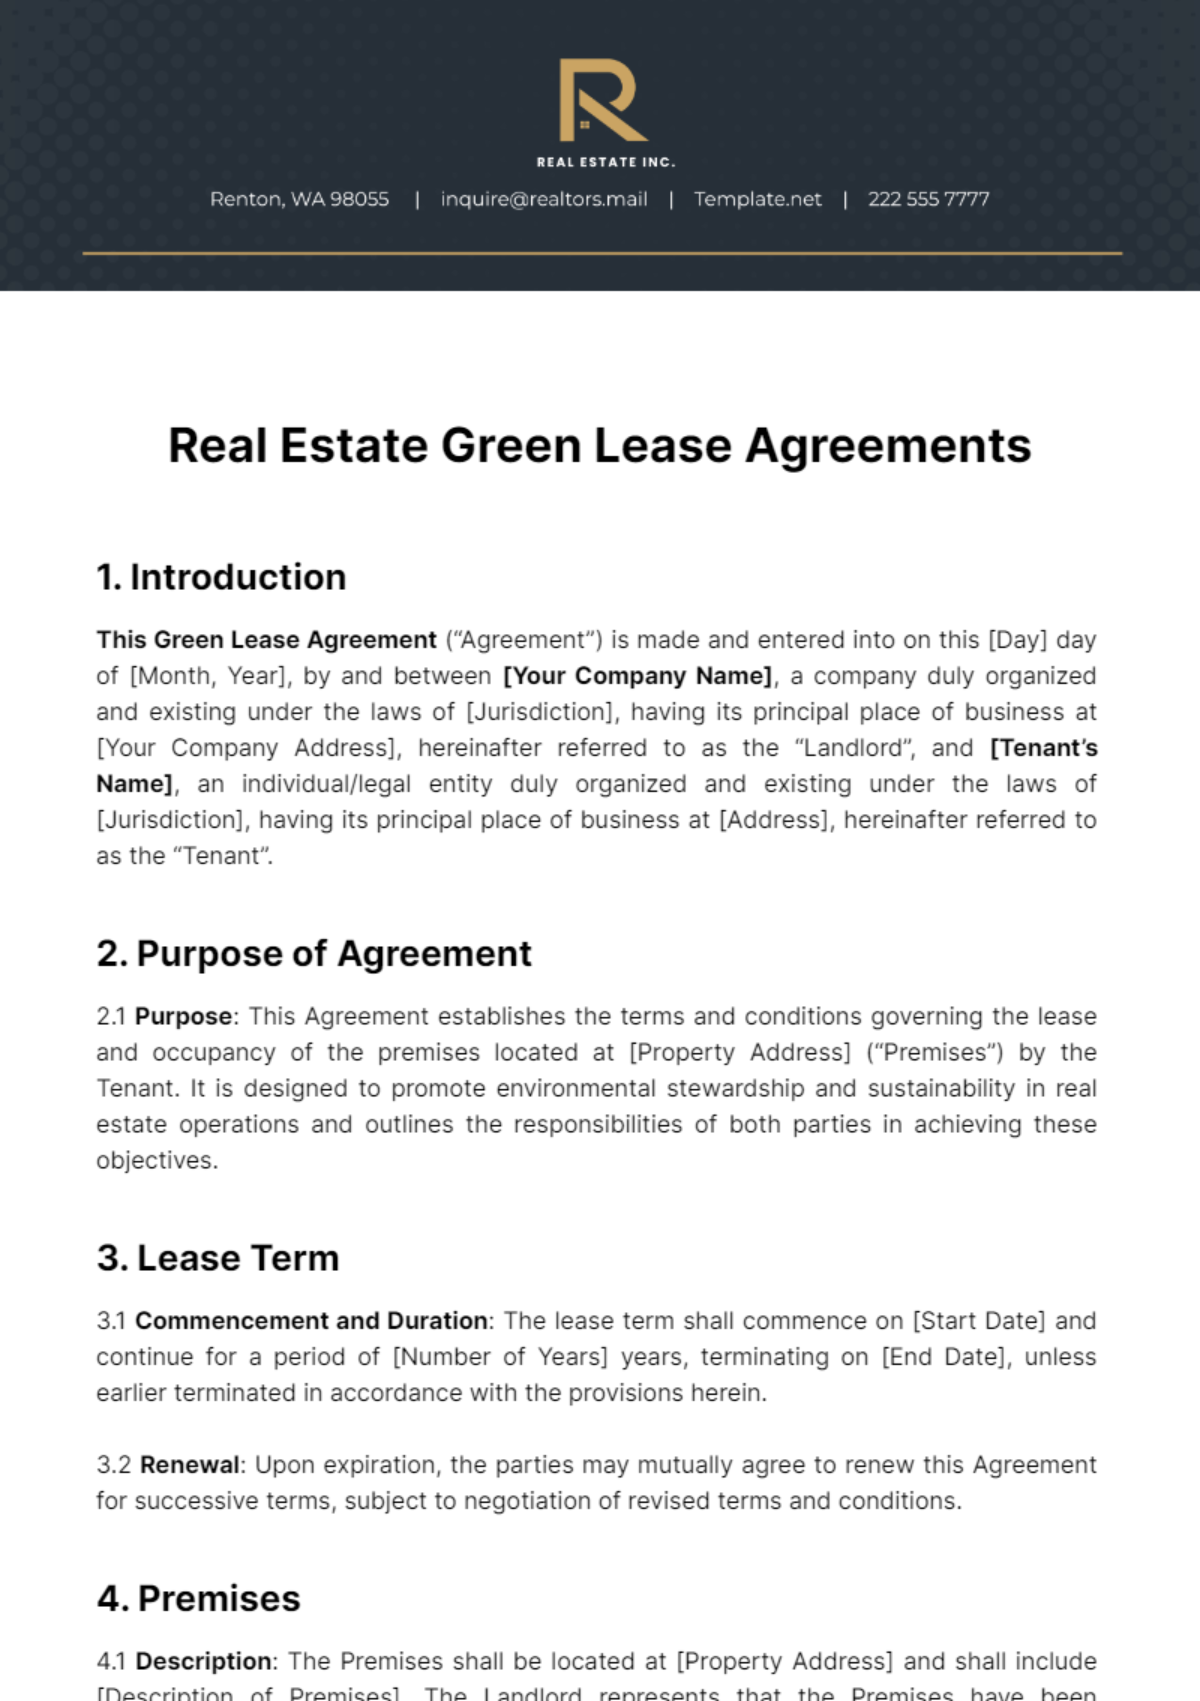 Real Estate Green Lease Agreements Template